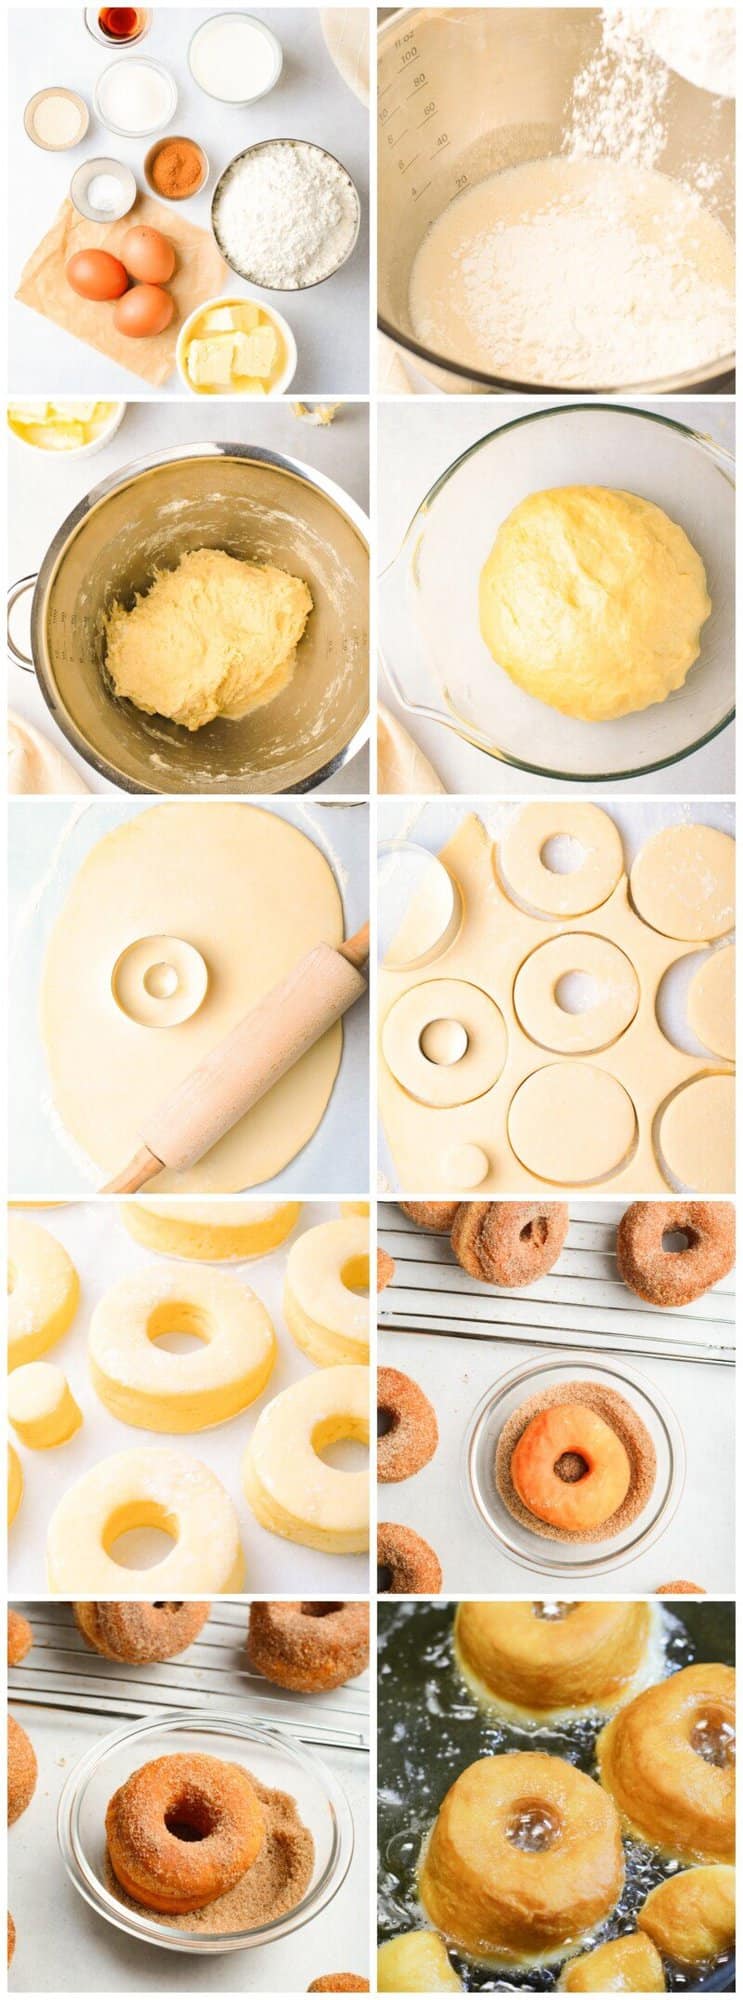 step by step photos for how to make cinnamon sugar donuts.